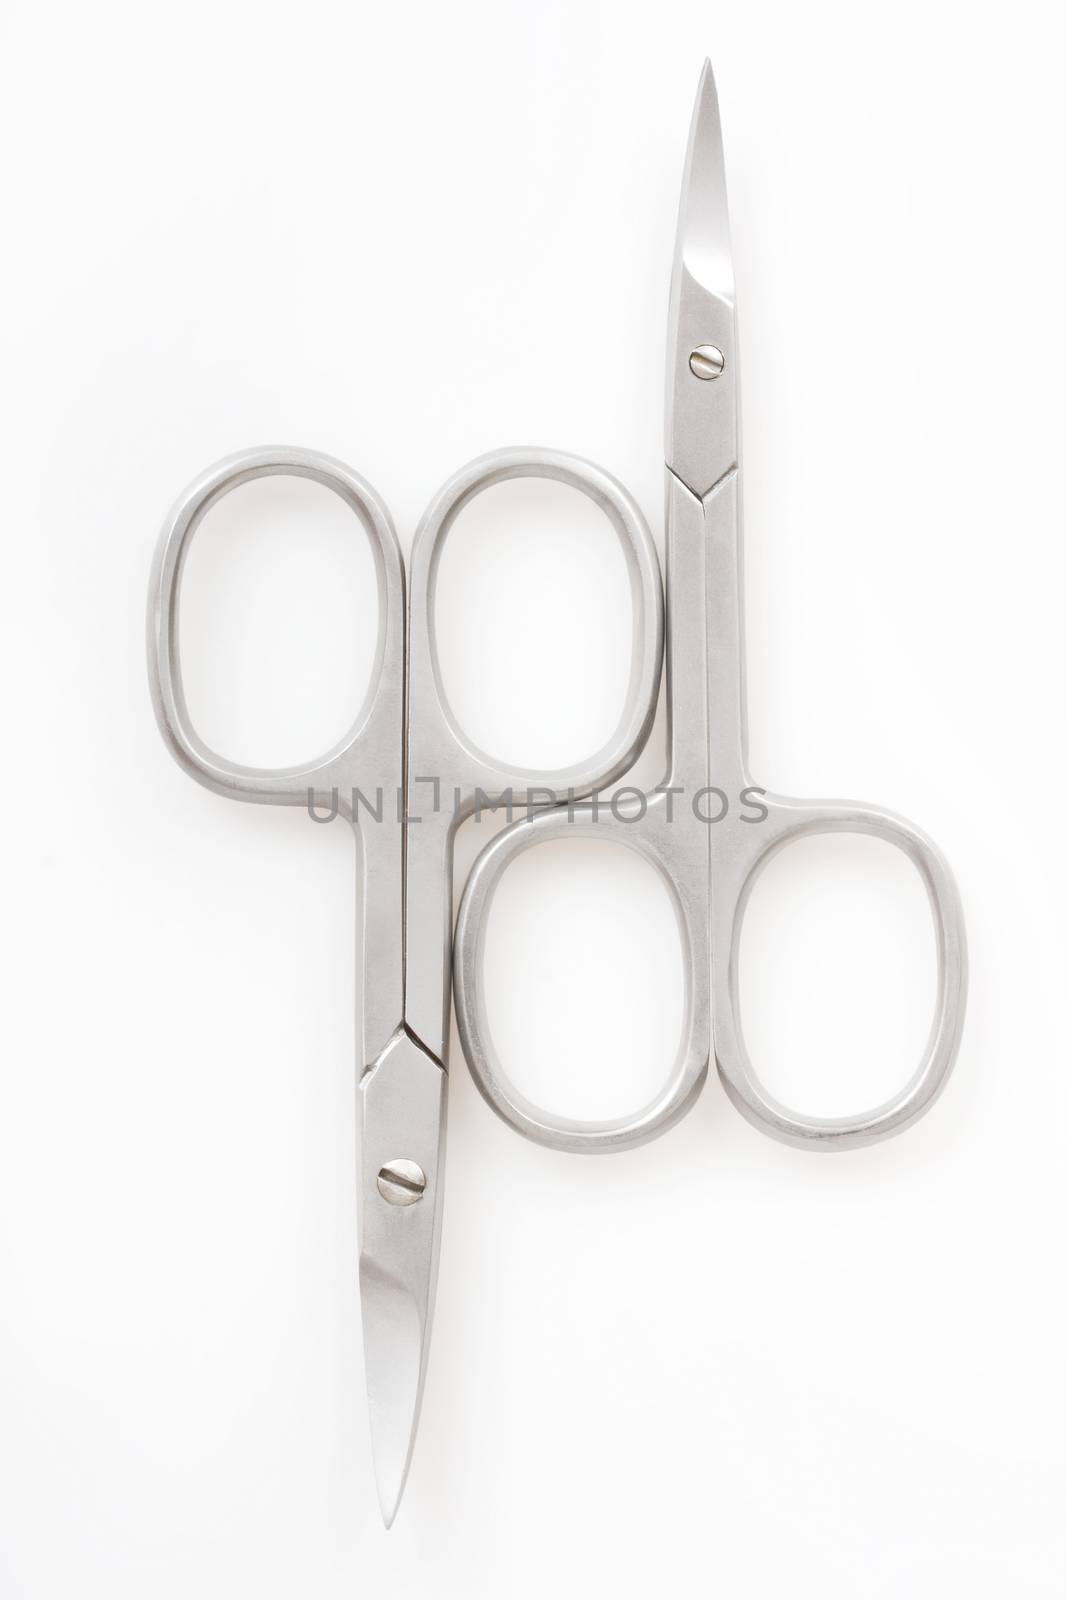 Two pairs of scissors on a white background by aniad